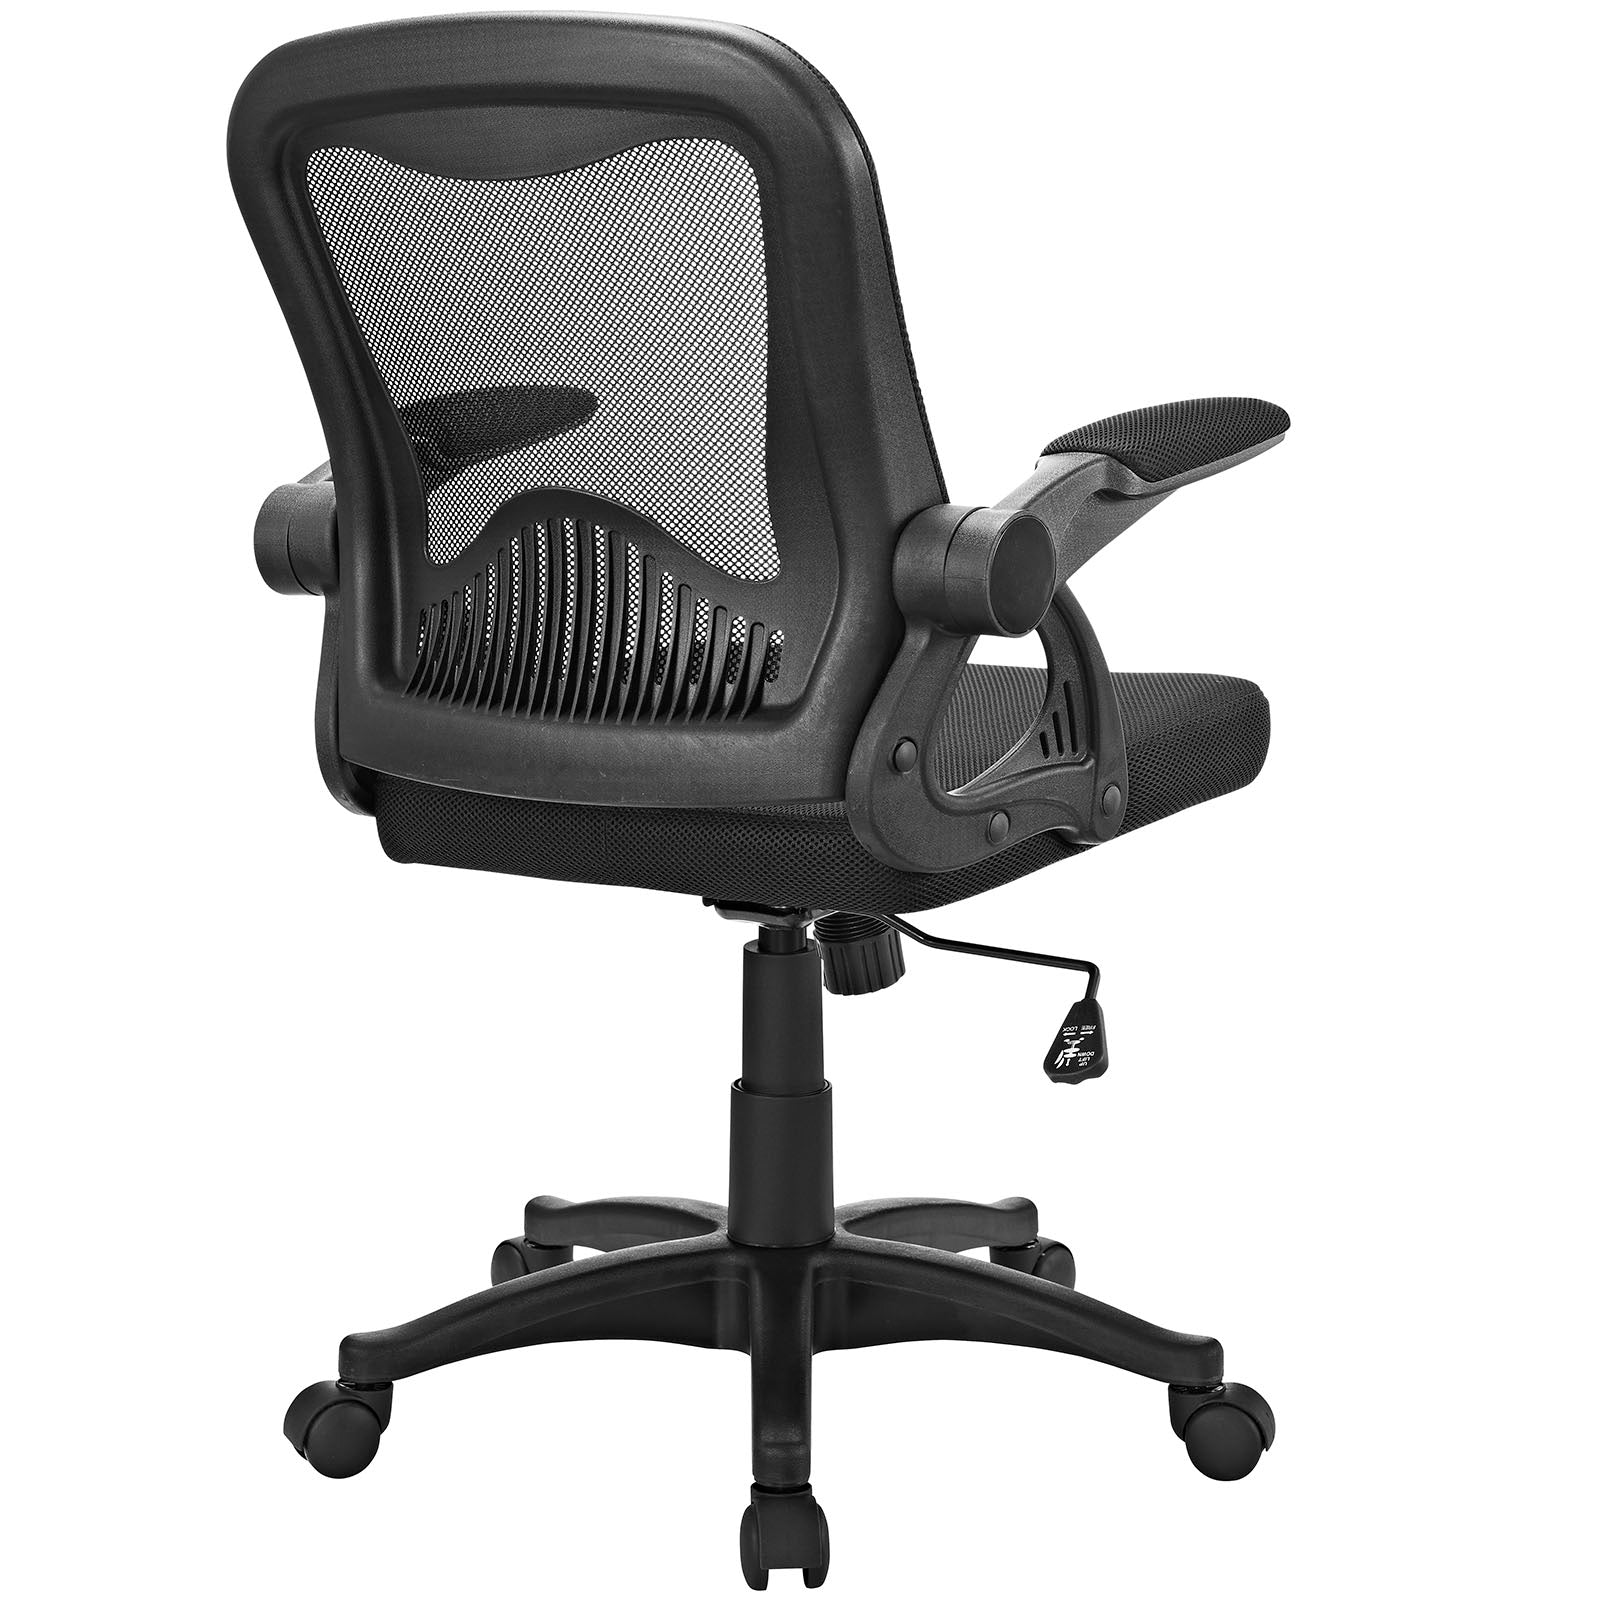 Advance Office Chair - East Shore Modern Home Furnishings